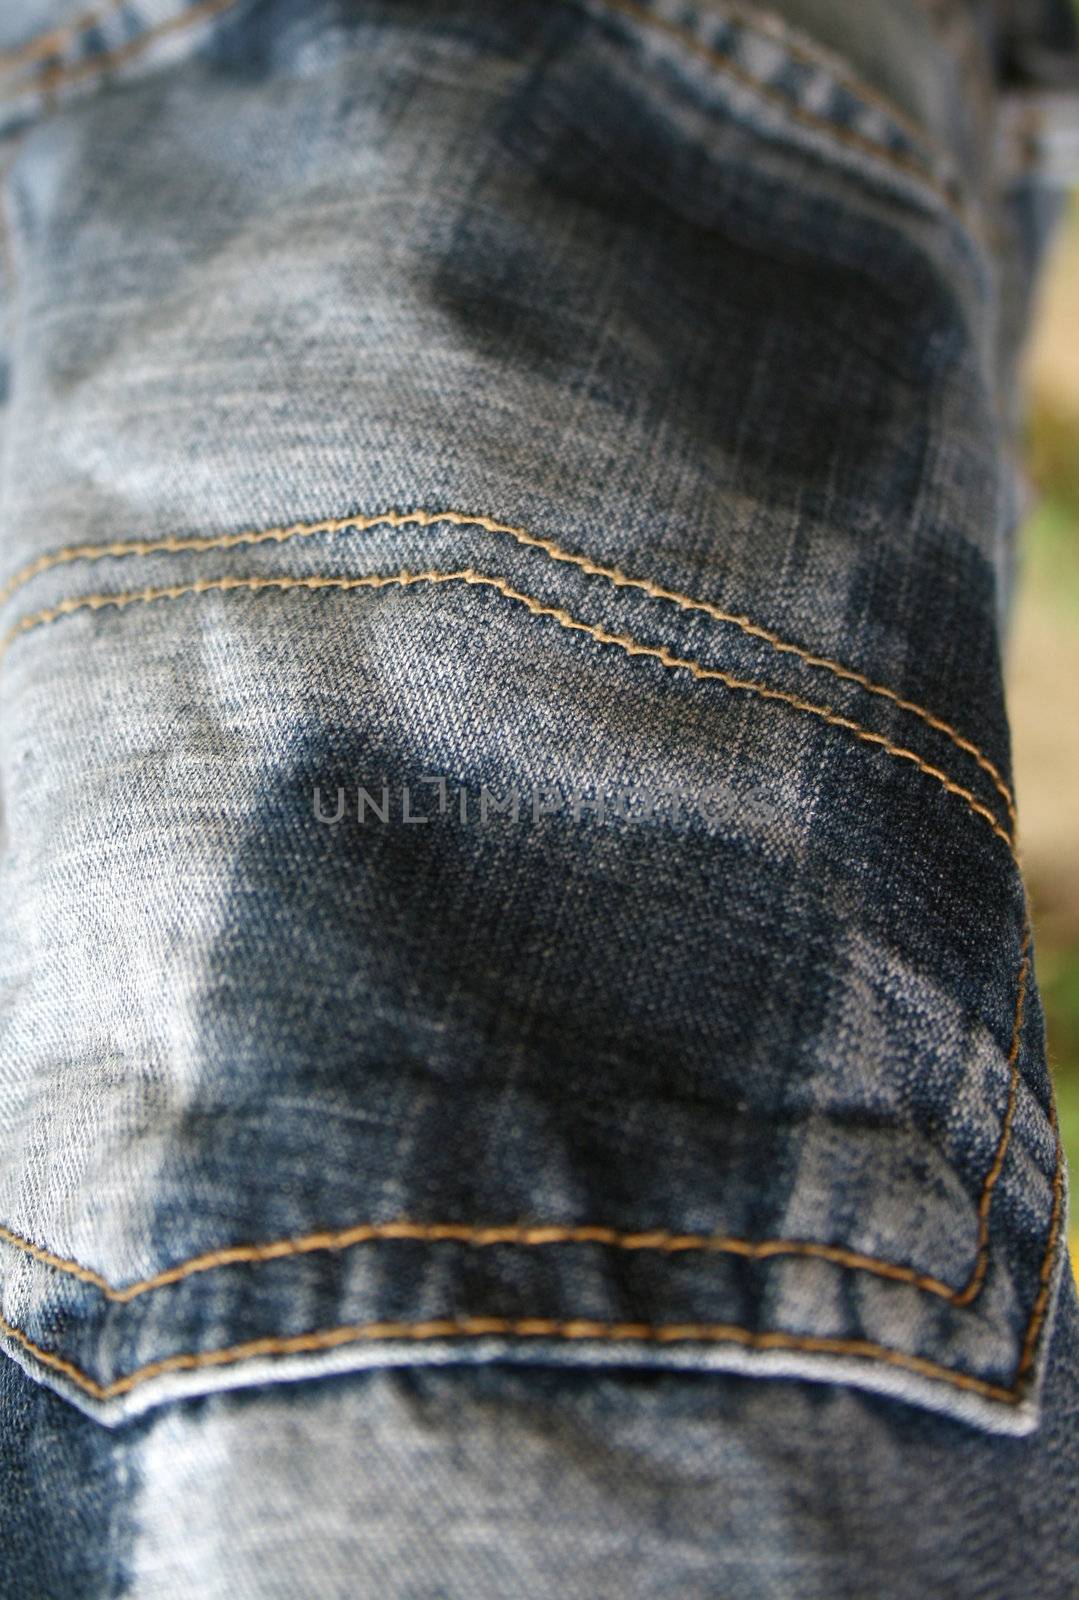 macro shot of the back pocket of jeans